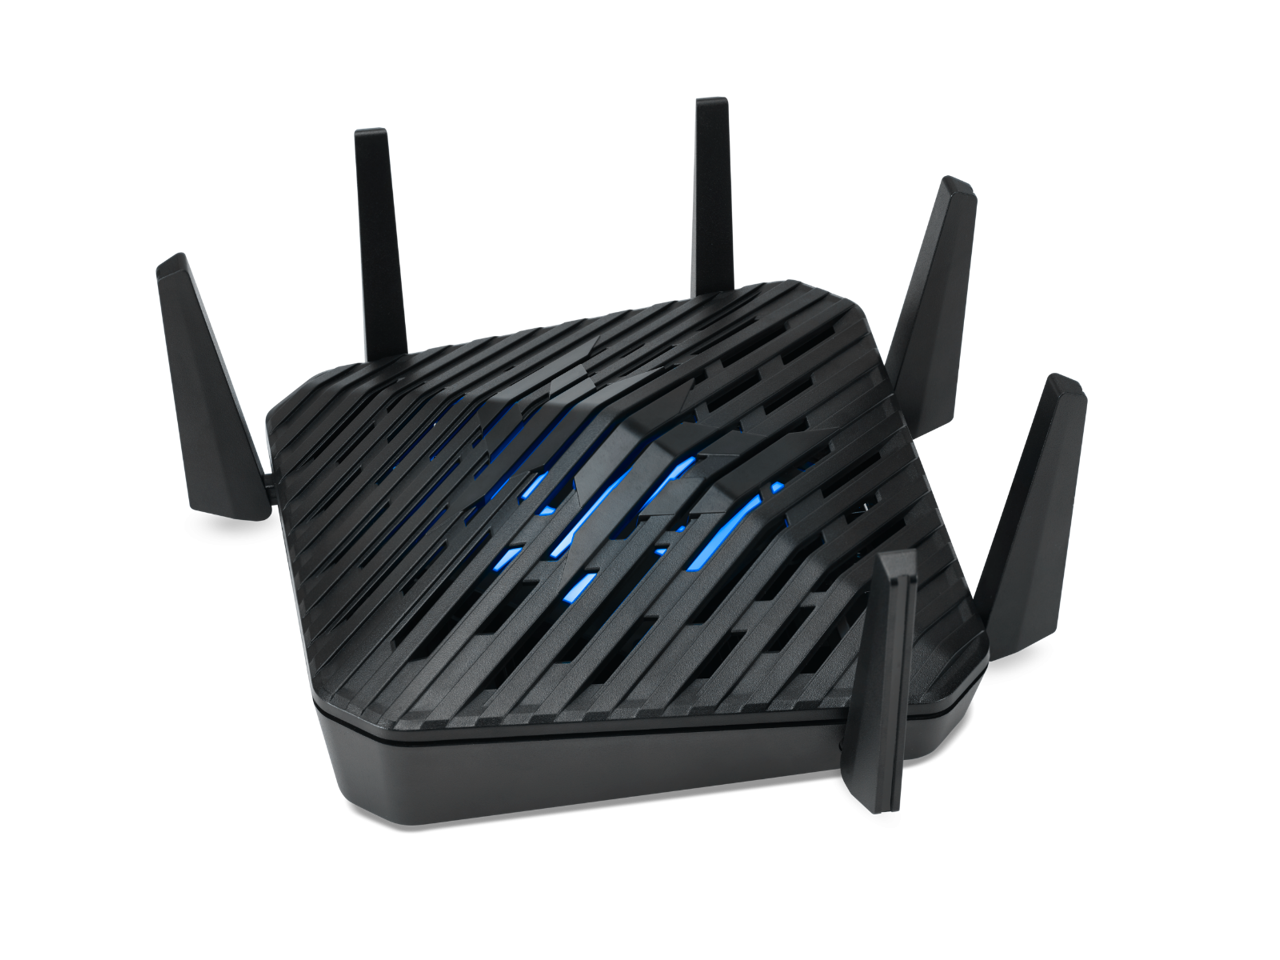 Acer Predator Connect W6 Wi-Fi 6 E Gaming Router | Hybrid Qo S Compatible with Intel Killer Prioritization Engine | Wi-Fi 6 E Tri-Band Axe7800 (2.4 G Hz/5 G Hz/6 G Hz | Gigabit Router | Lifetime Internet Security